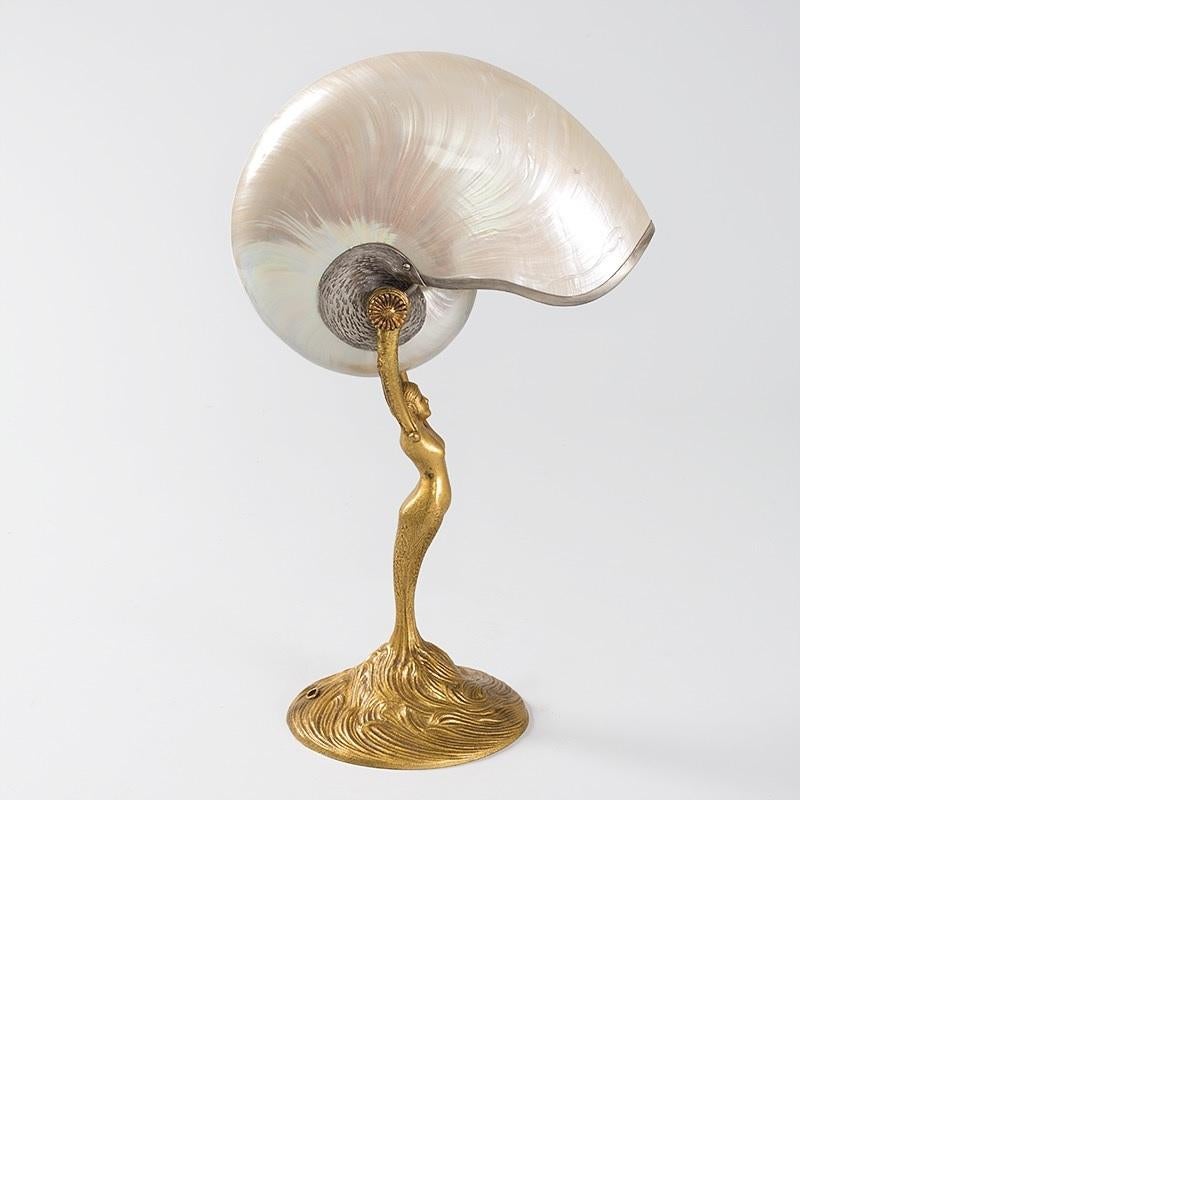 A Tiffany Studios New York “Nautilus” table lamp with a silver-lined nautilus shade suspended within a gilt bronze figural base. The base is in the shape of a mermaid with outstretched arms, emerging from a seascape. When Tiffany conceived the